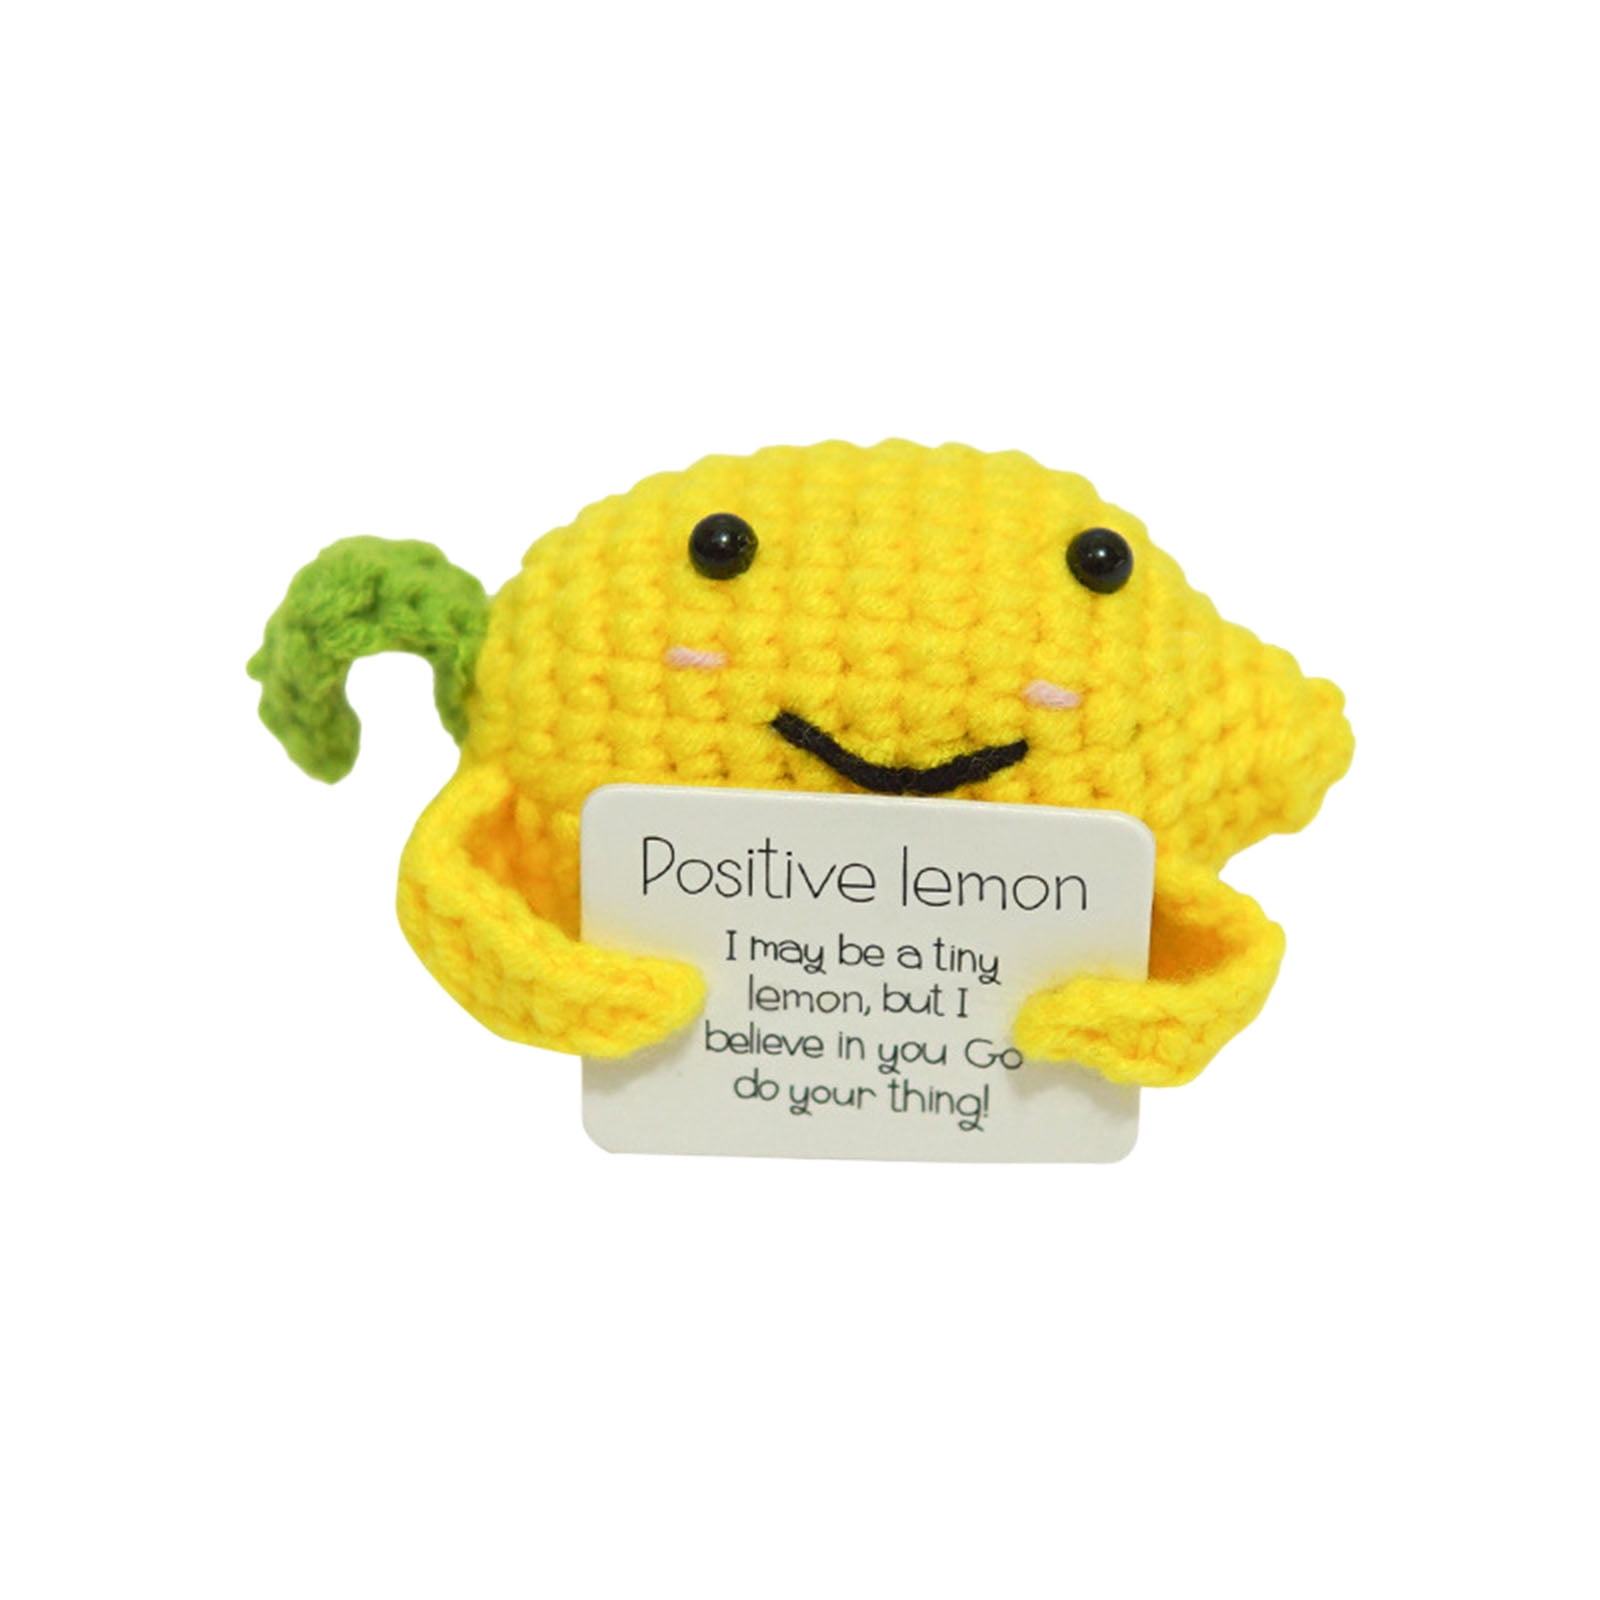 Chunky Pickle Tags~Crochet Amigurumi Emotional Support Pickle Tags~Set of 5  or 7~Punny Pick Me Up Pickle Patches~Faux Leather/Ready to Ship